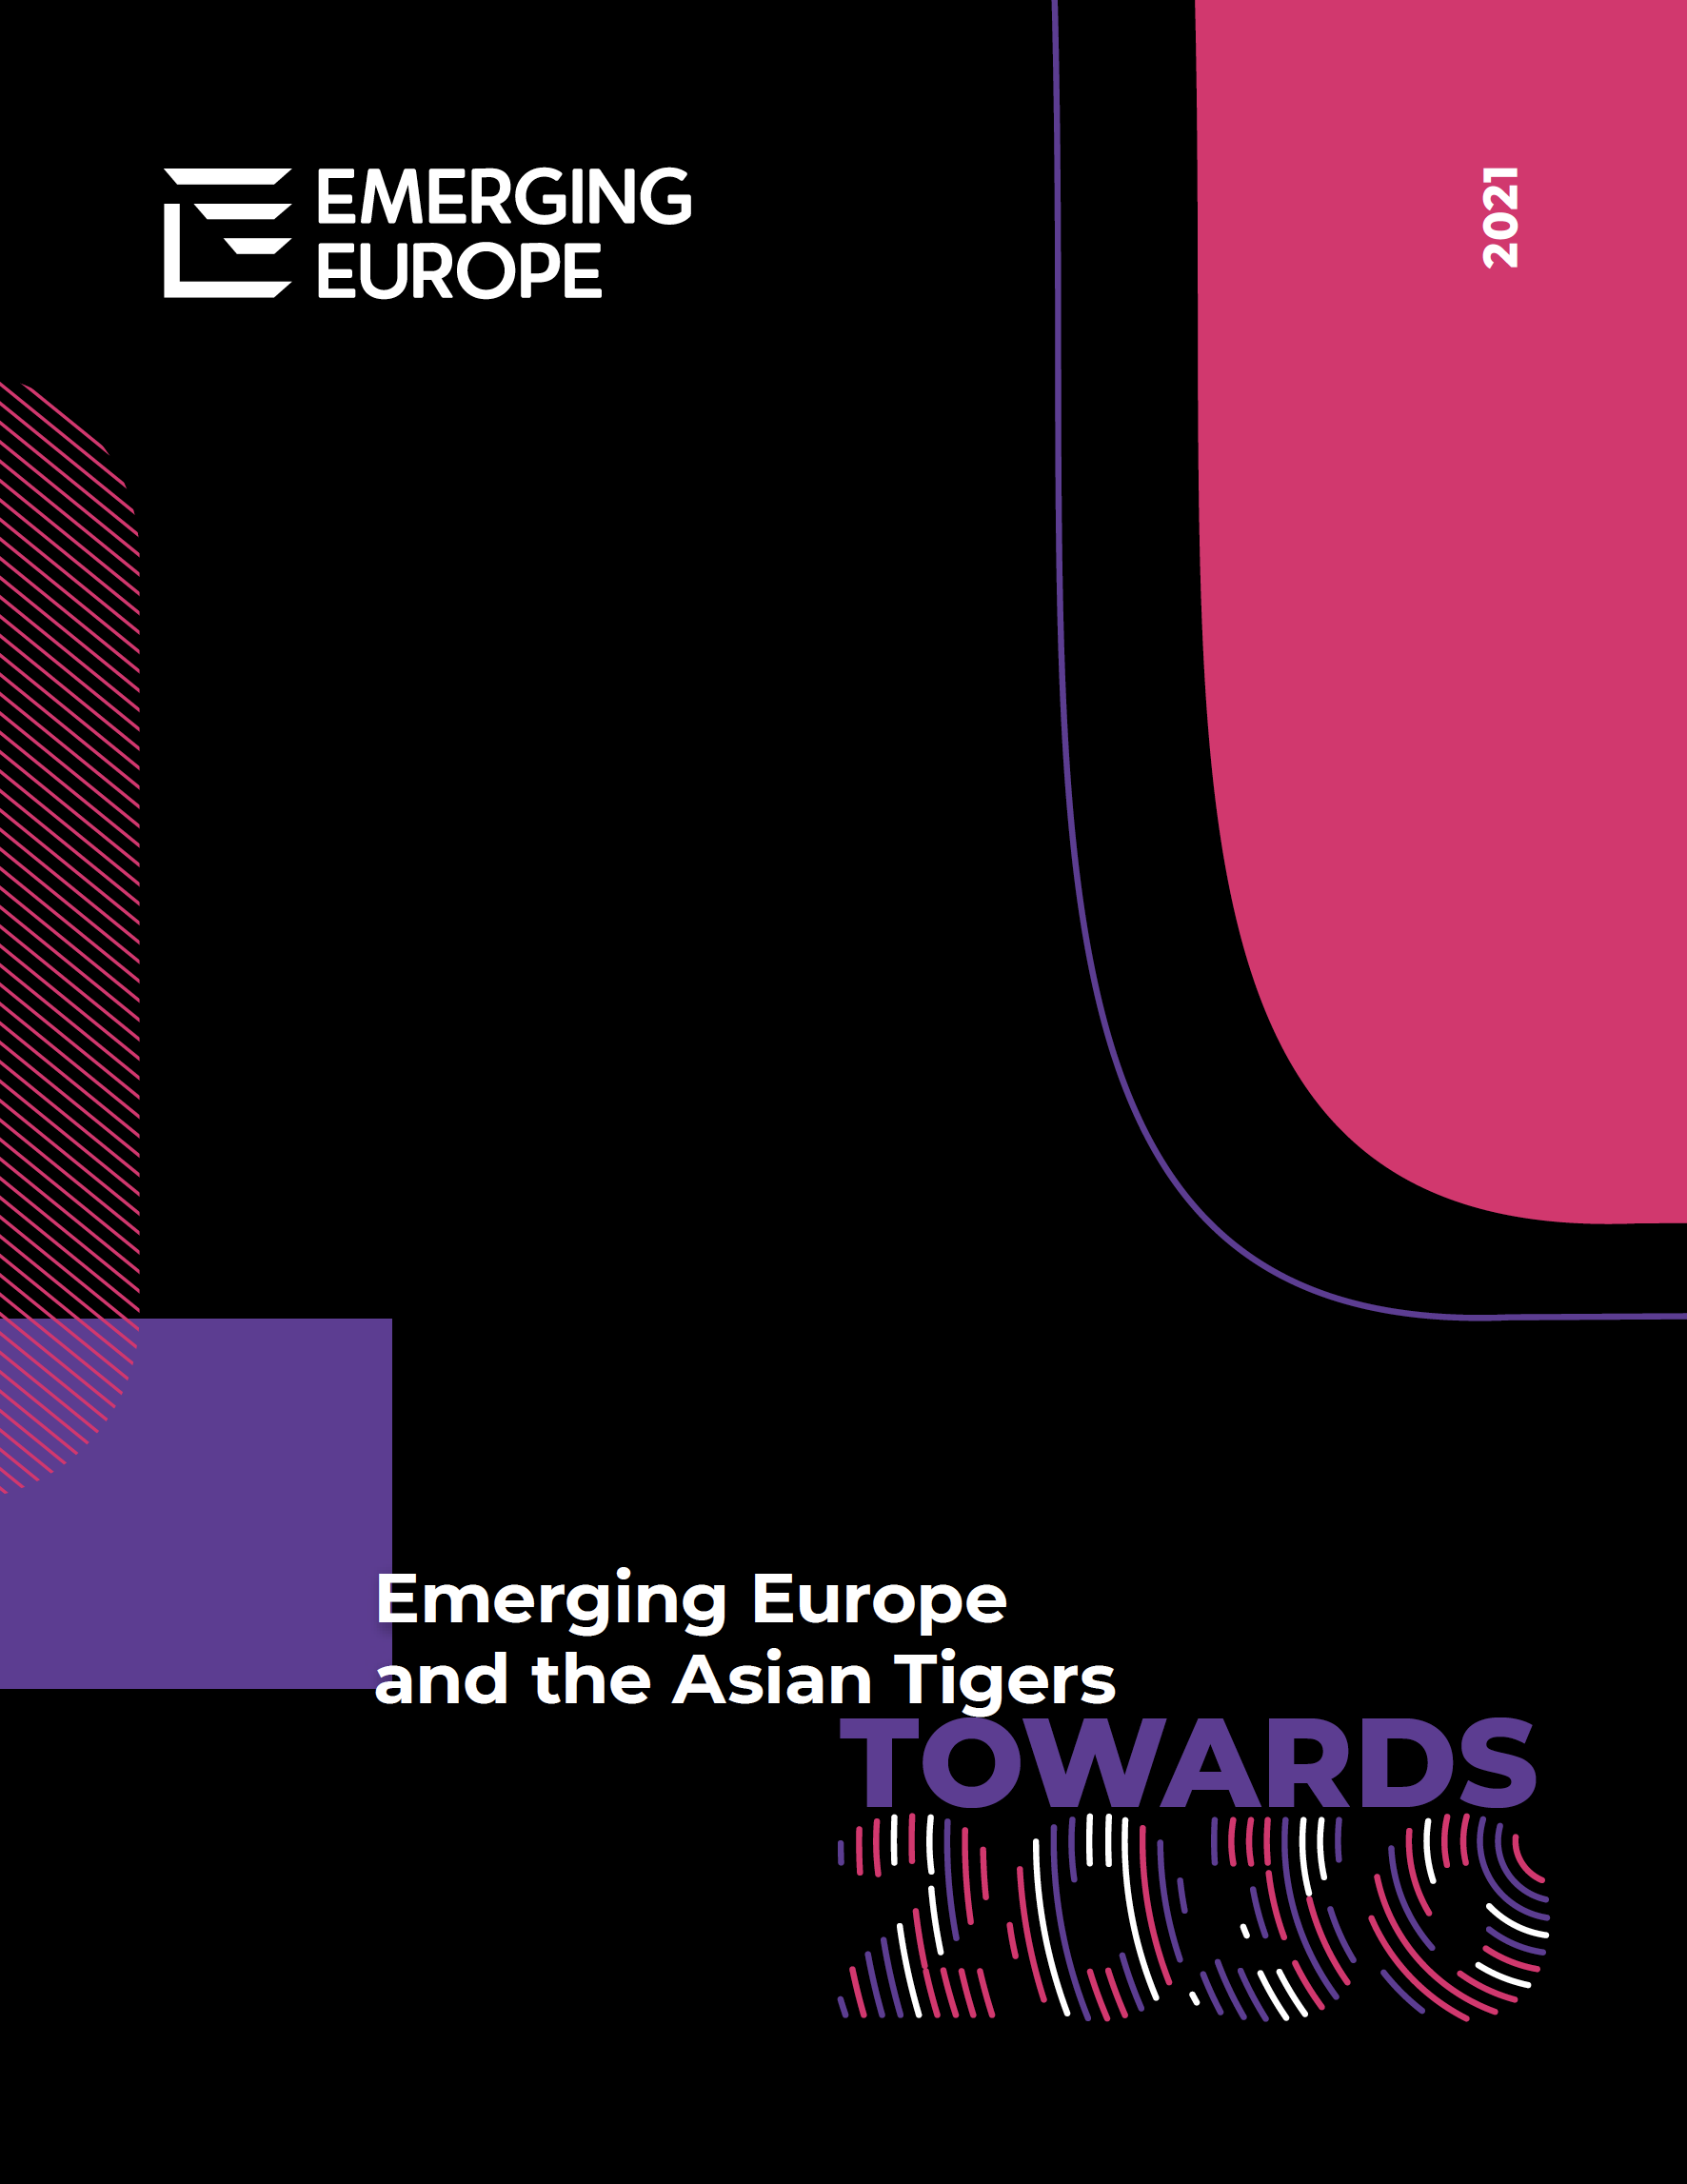 Emerging Europe and the Asian Tigers: Towards 2030